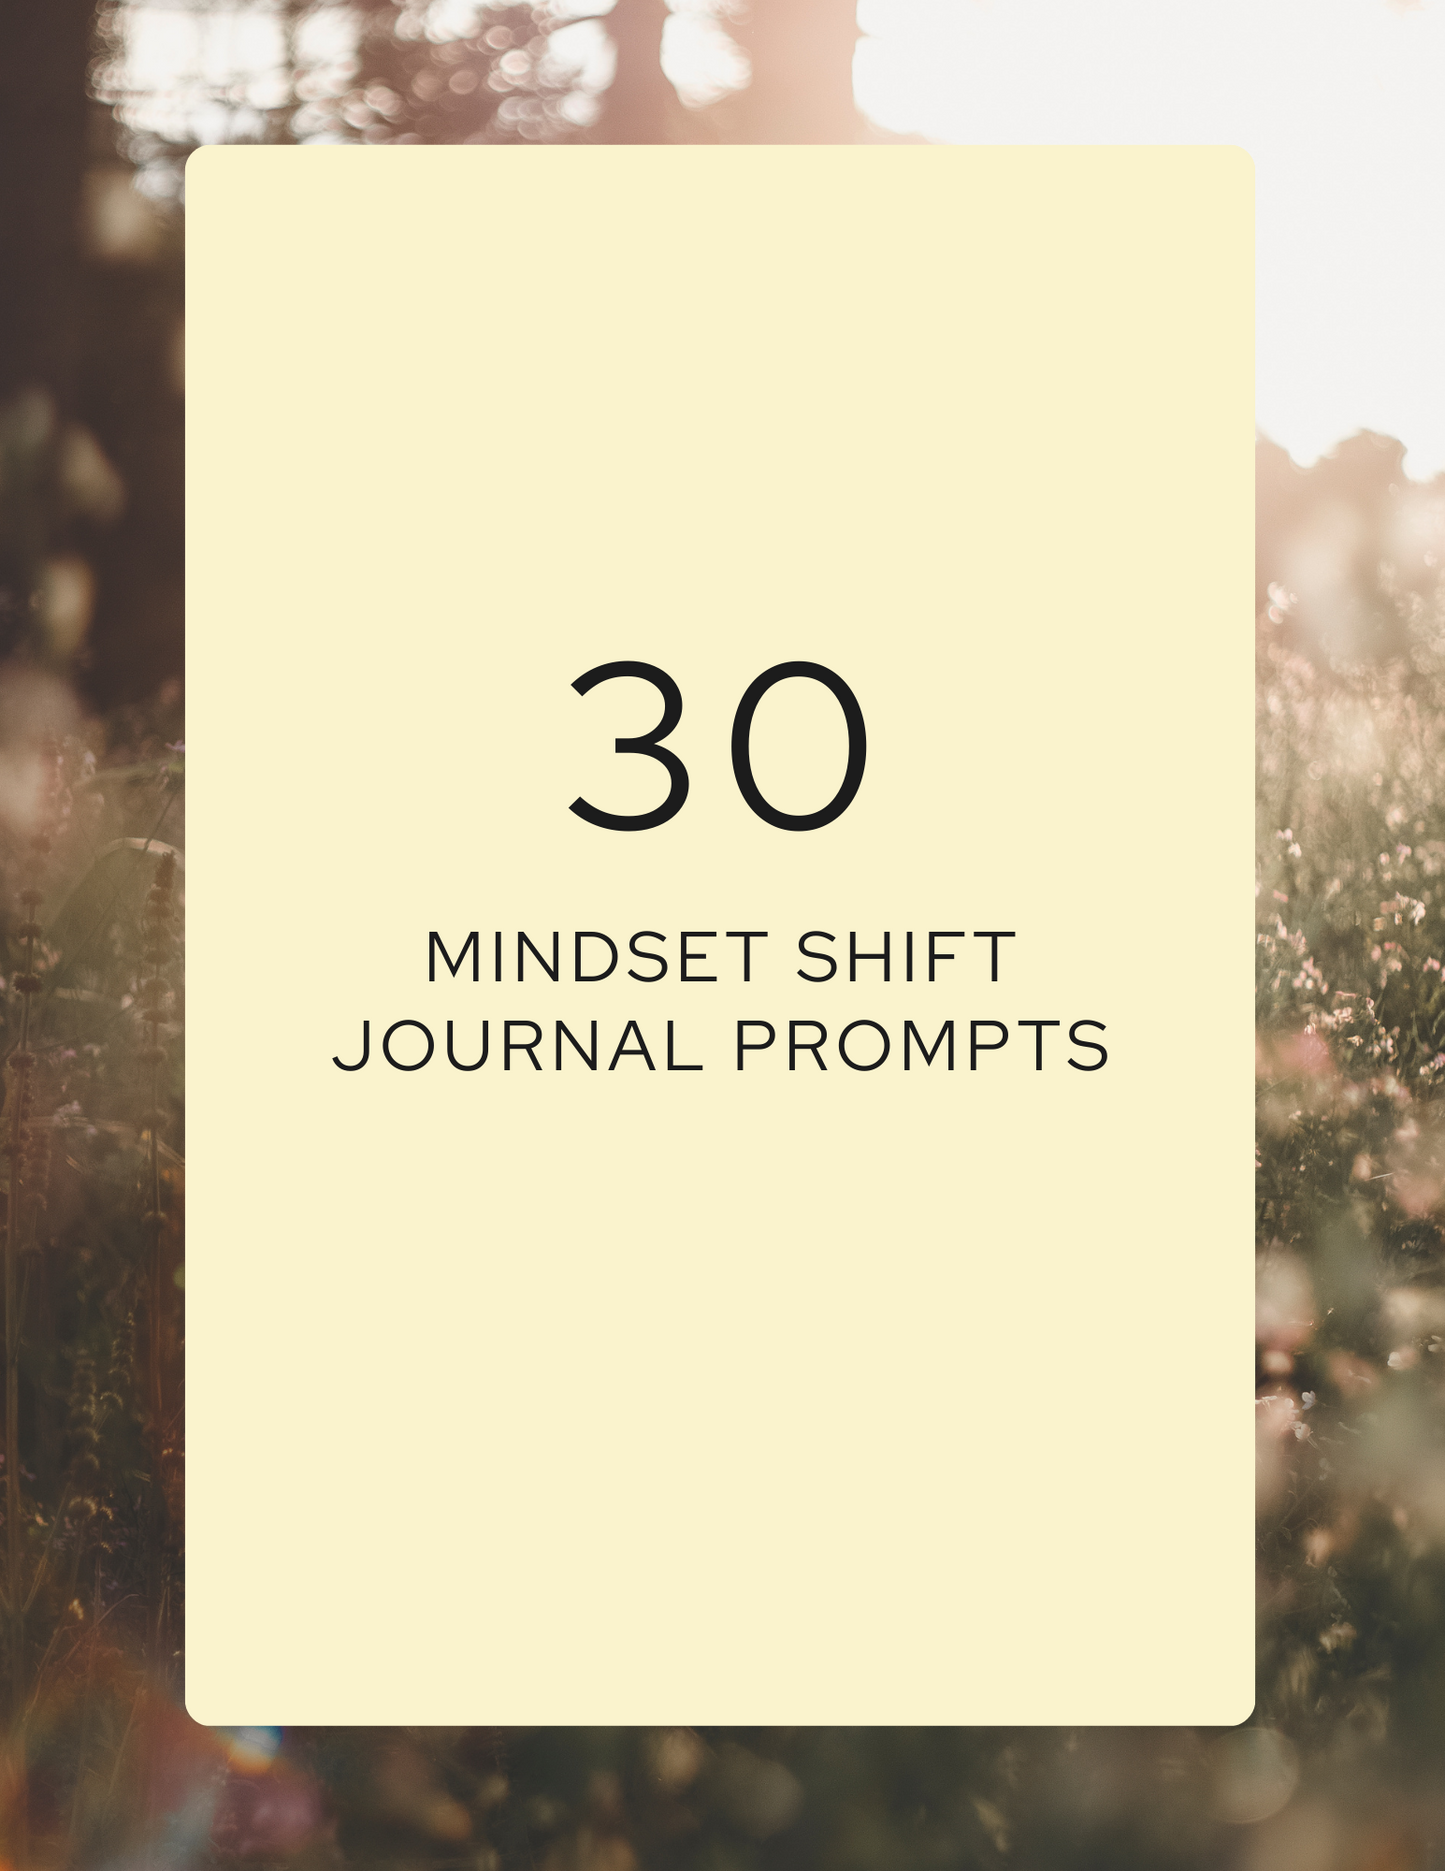 The Mindset Shift Journal and 30 Affirmations